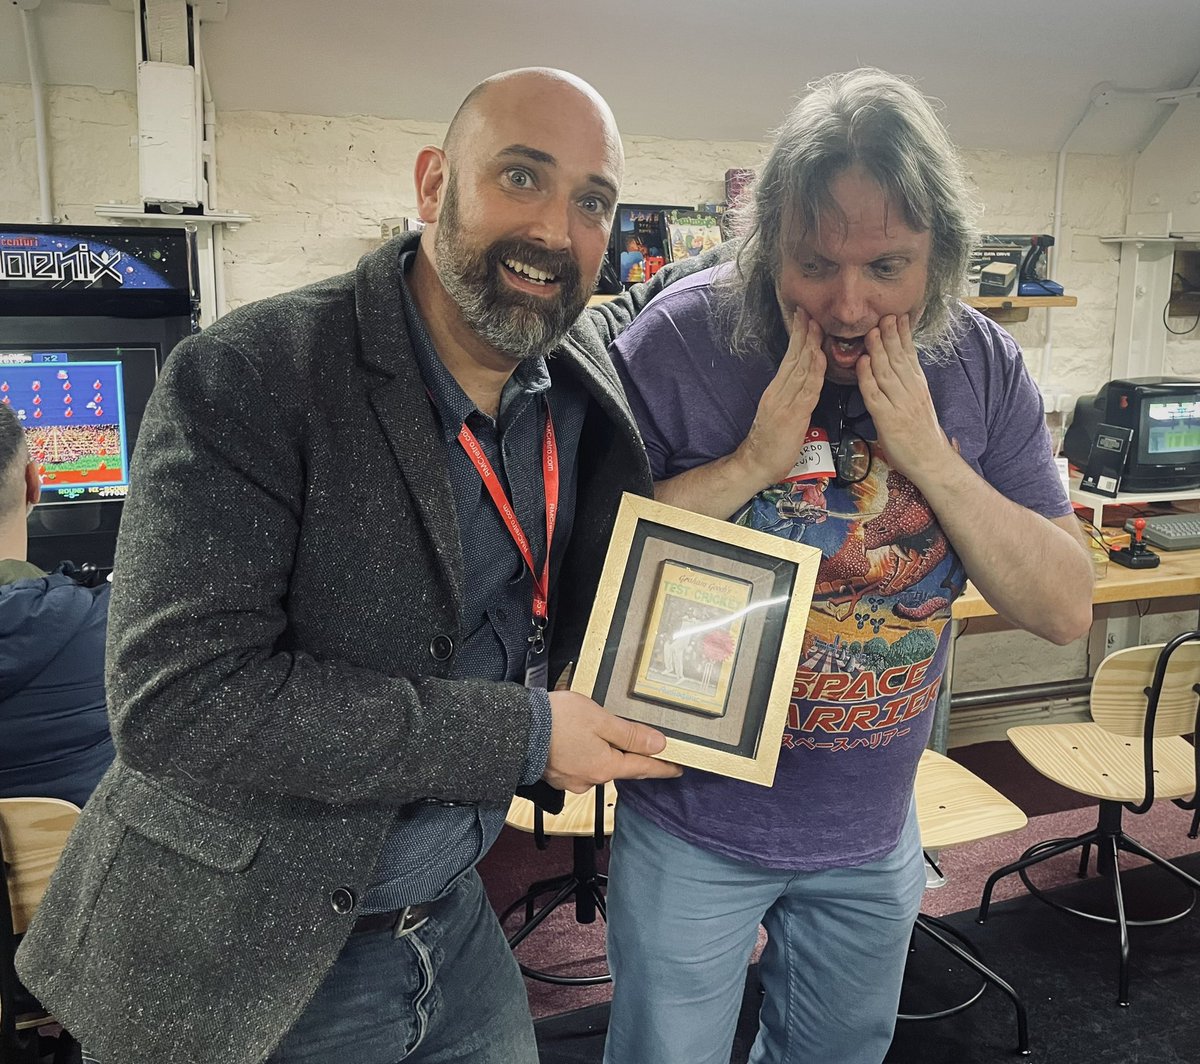 Congratulations to @mrCustardo on winning this round of the Golden Gooch award with his high score on Asteroids today. He is thrilled to be taking it home to Holland.